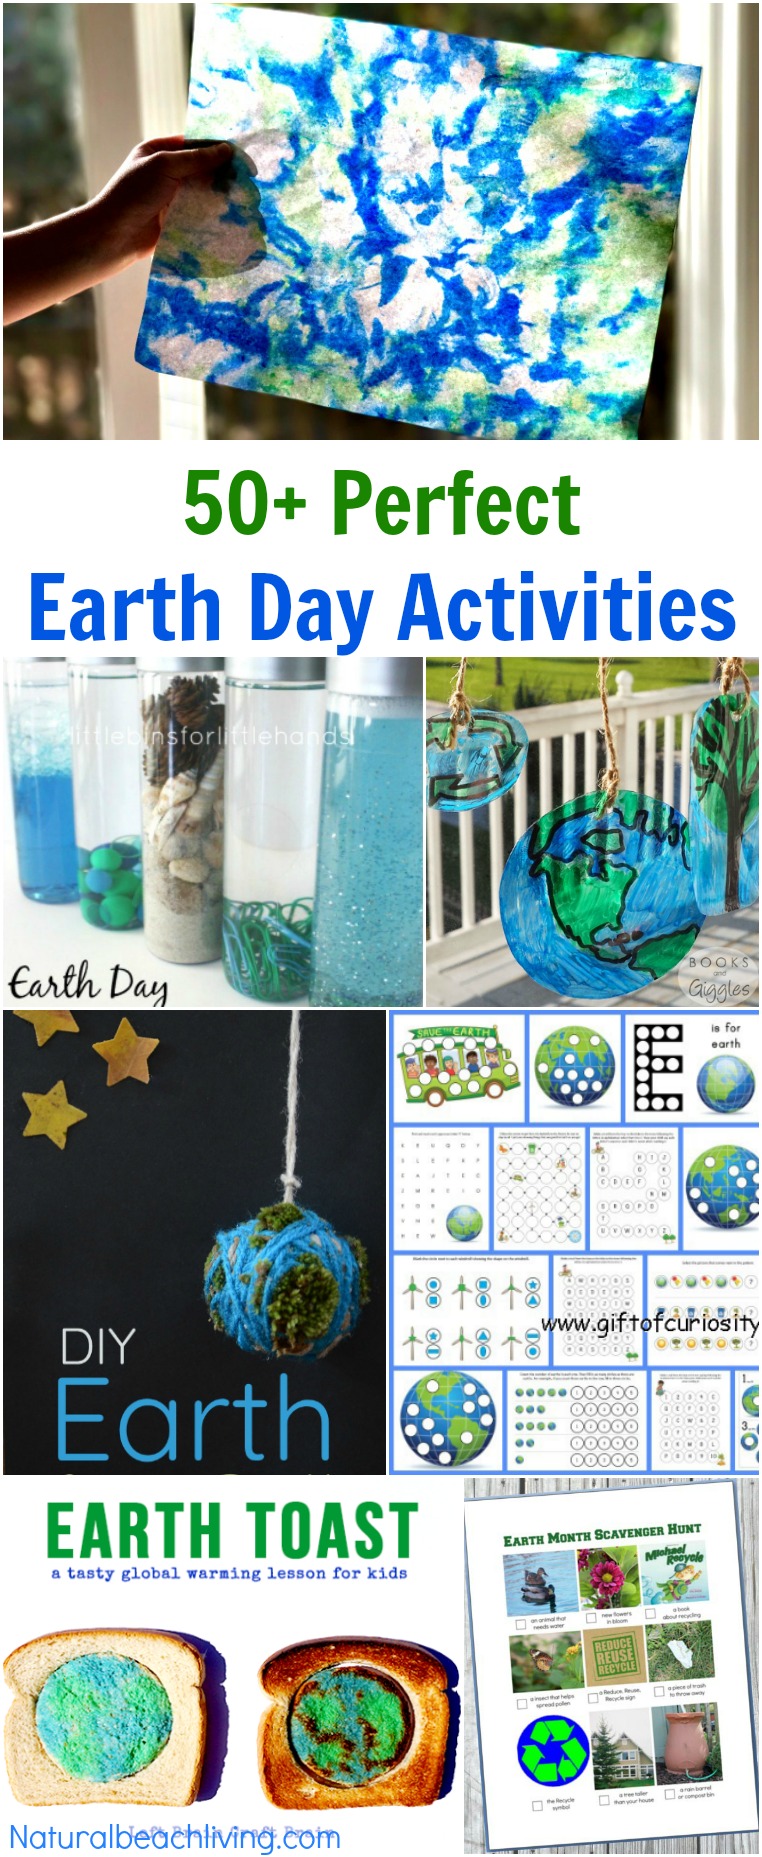 The Ultimate Earth Day Theme Preschool Activities, 50+ Earth Day Activities for Kids, Spring Preschool theme, Earth Day Crafts, Art, Sensory & Science 